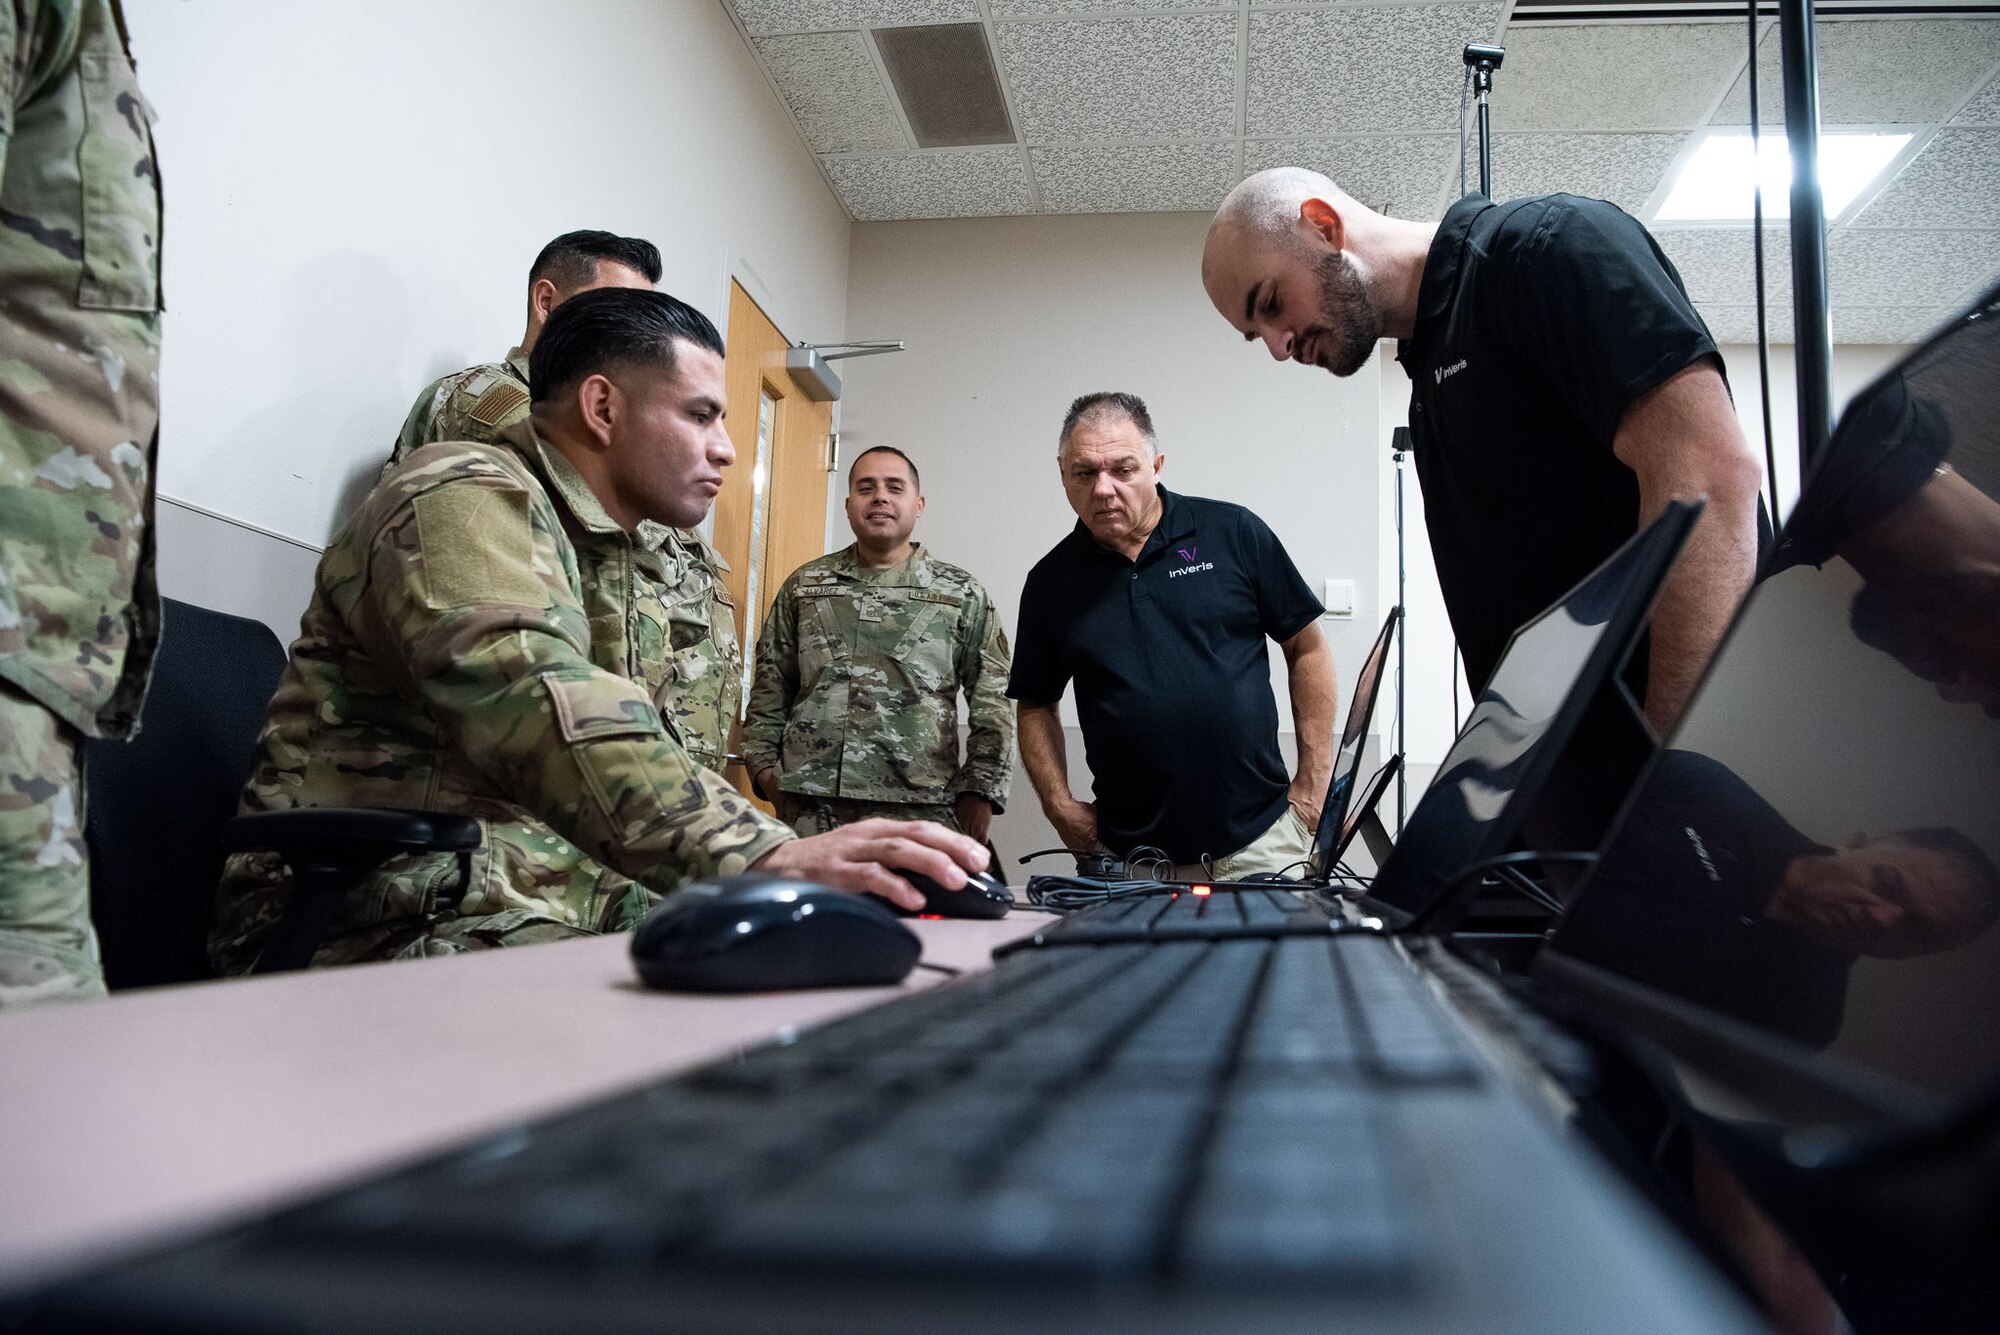 Tech. Sgt. Ernesto Gutierrez, 837th Training Squadron, places his hand on the mouse as he navigates the new SV-R simulator program, as contractors look on at the Inter-American Air Forces Academy at Joint Base San Antonio-Lackland, Texas, Jan. 25, 2023. The simulator will be used to train military and law enforcement students from Latin America, focusing on counter narcotic efforts and combatting transnational criminal organizations. (U.S. Air Force photo by Vanessa R. Adame)